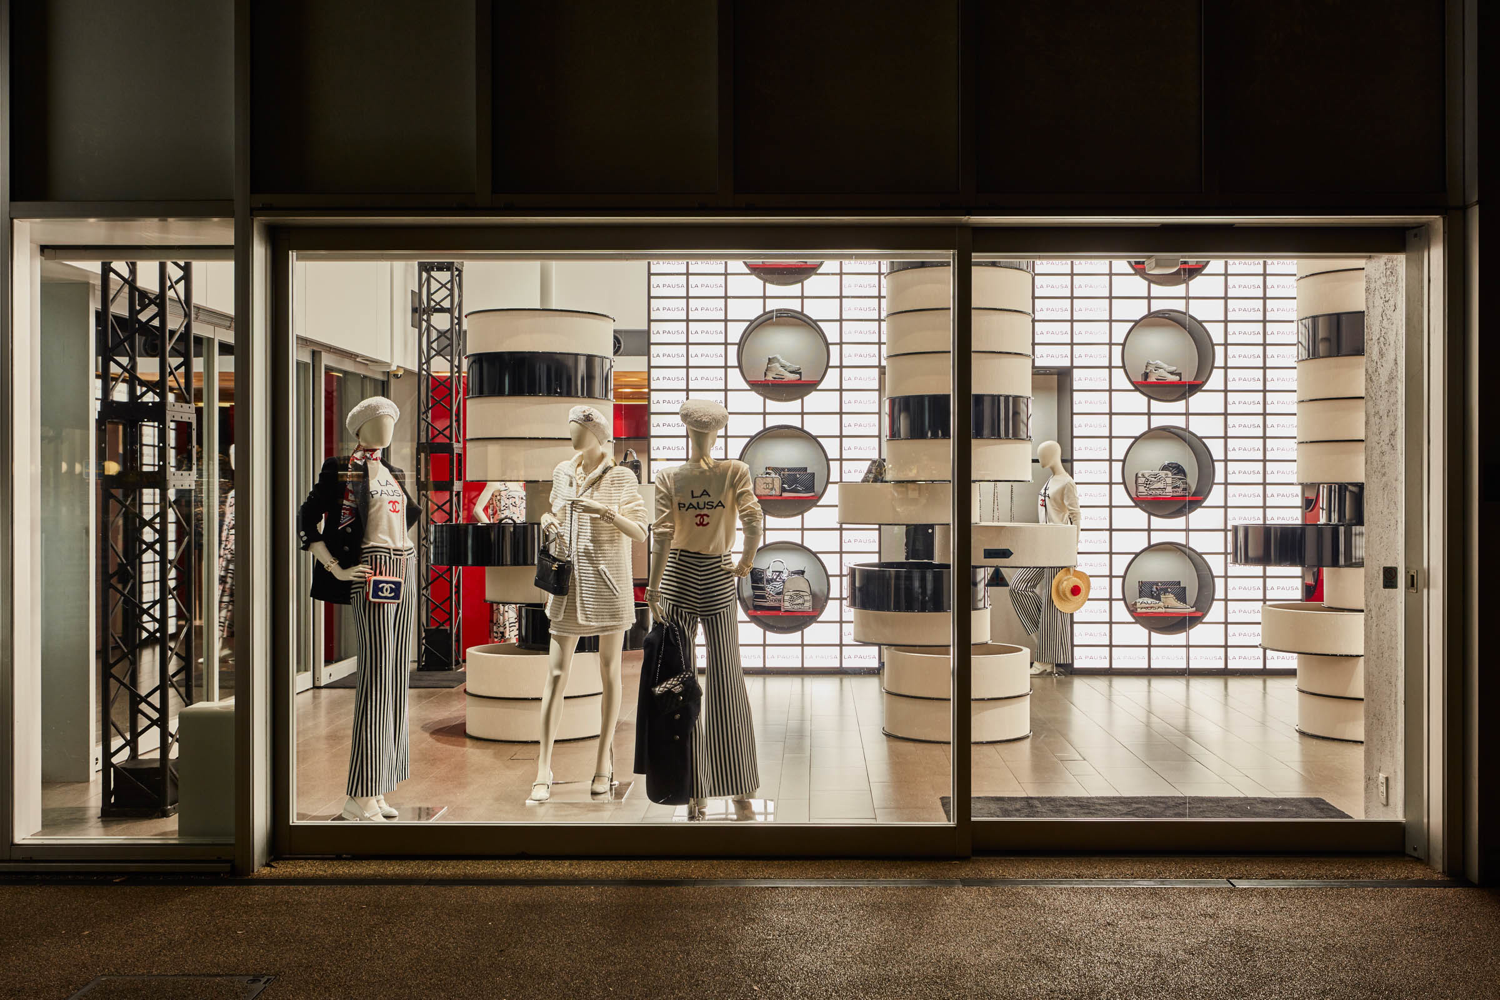 Tokyo: Chanel pop-up store